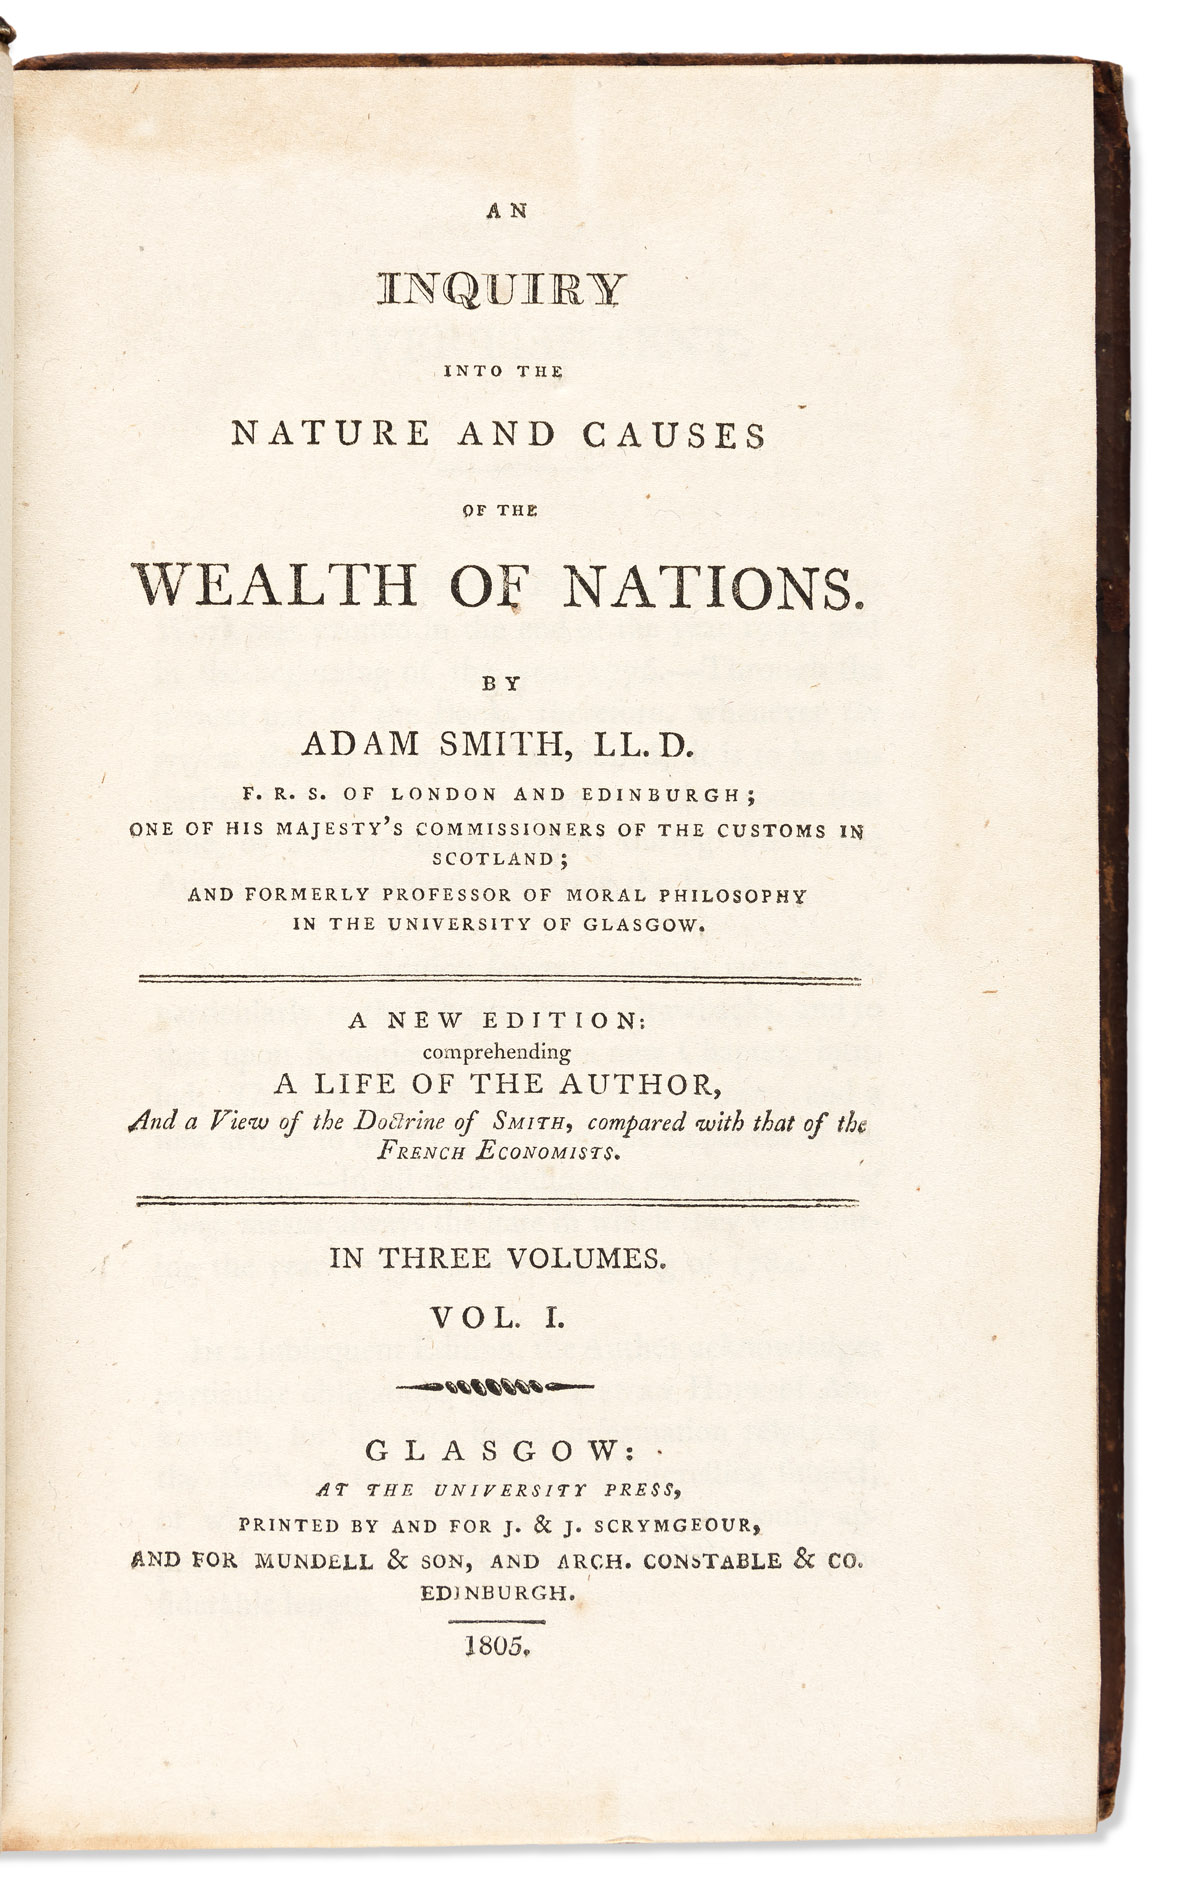 [Economics] Smith, Adam (1723-1790) An Inquiry into the Nature and Causes of the Wealth of Nations.